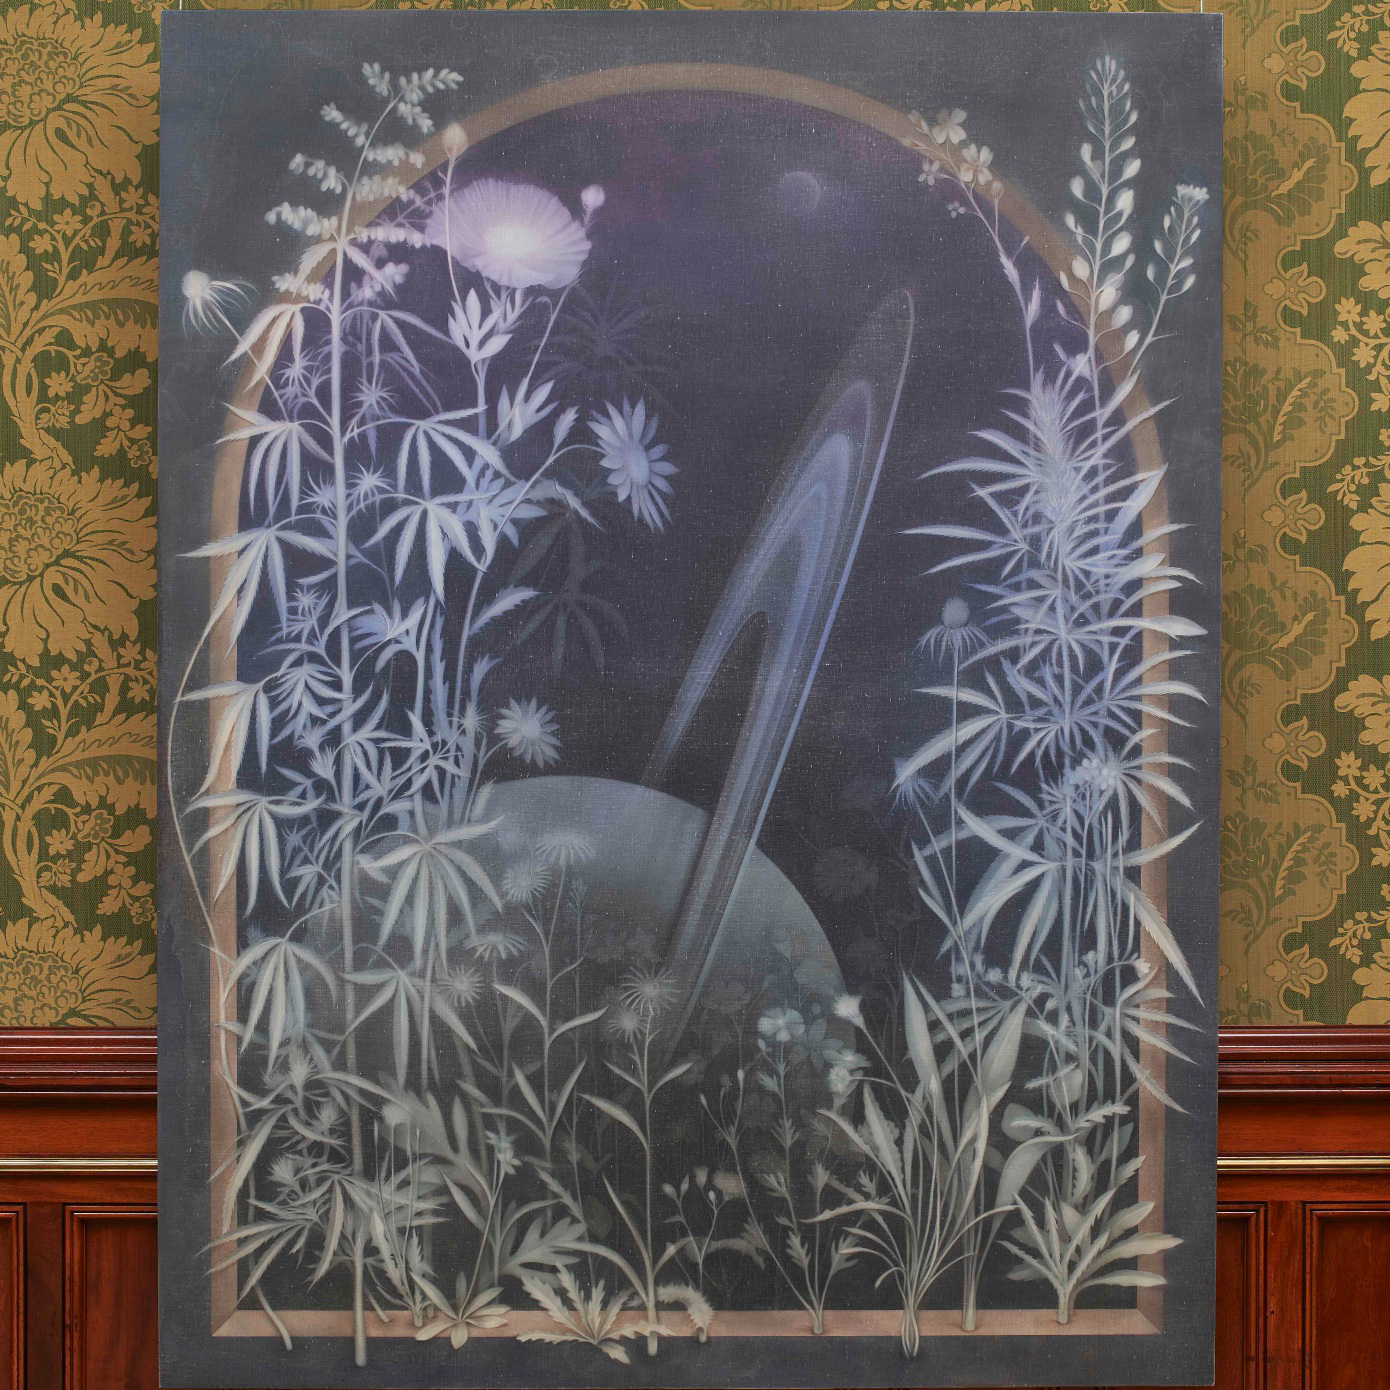 painting of planet with plants